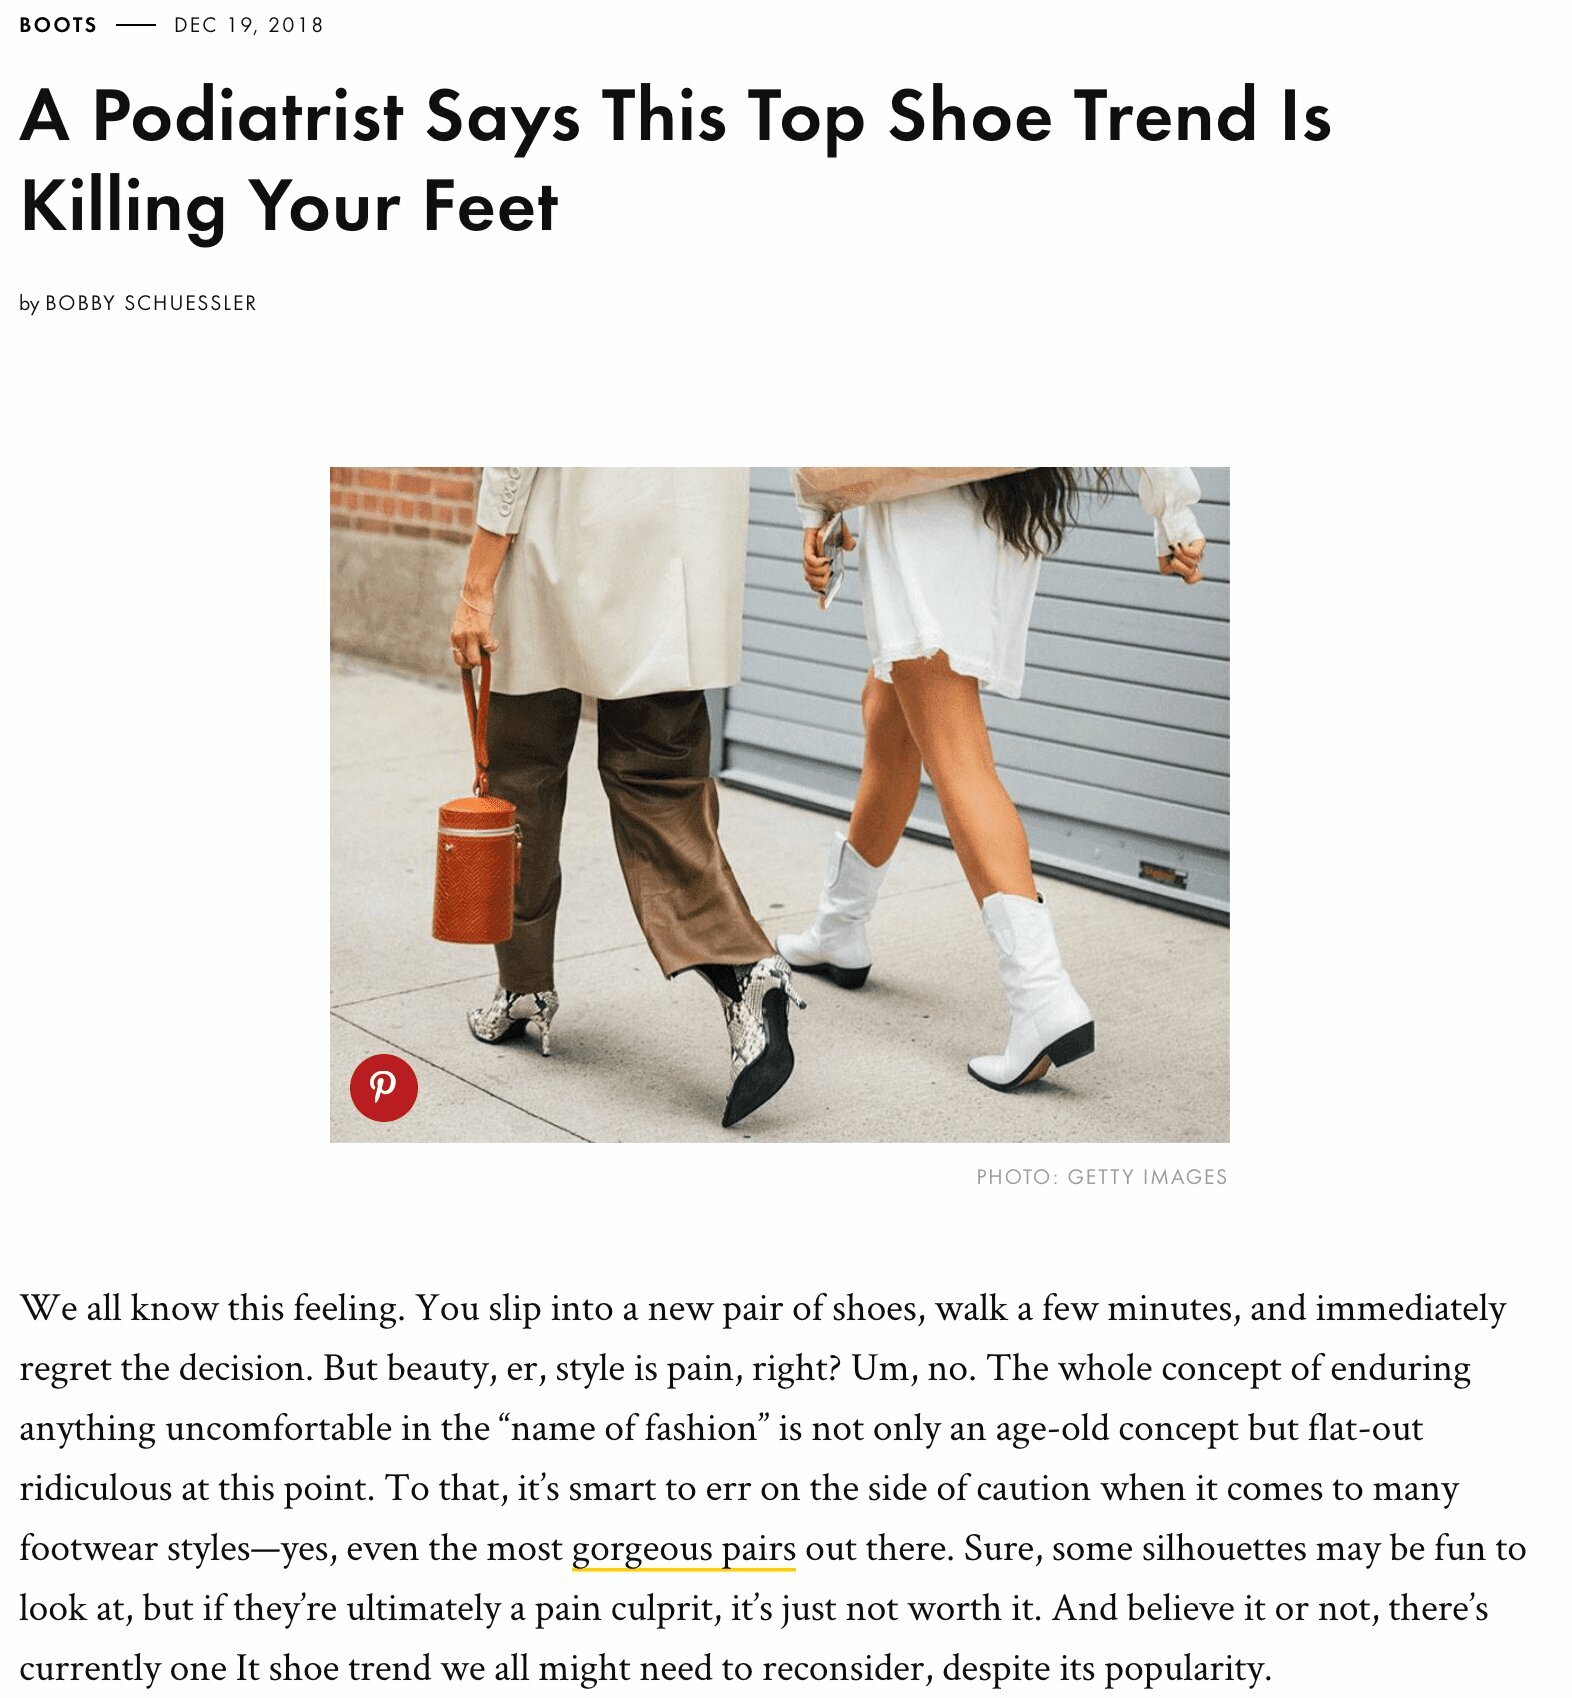 Manhattan Doctor Talks Shoe Trends that are Killing Your Feet